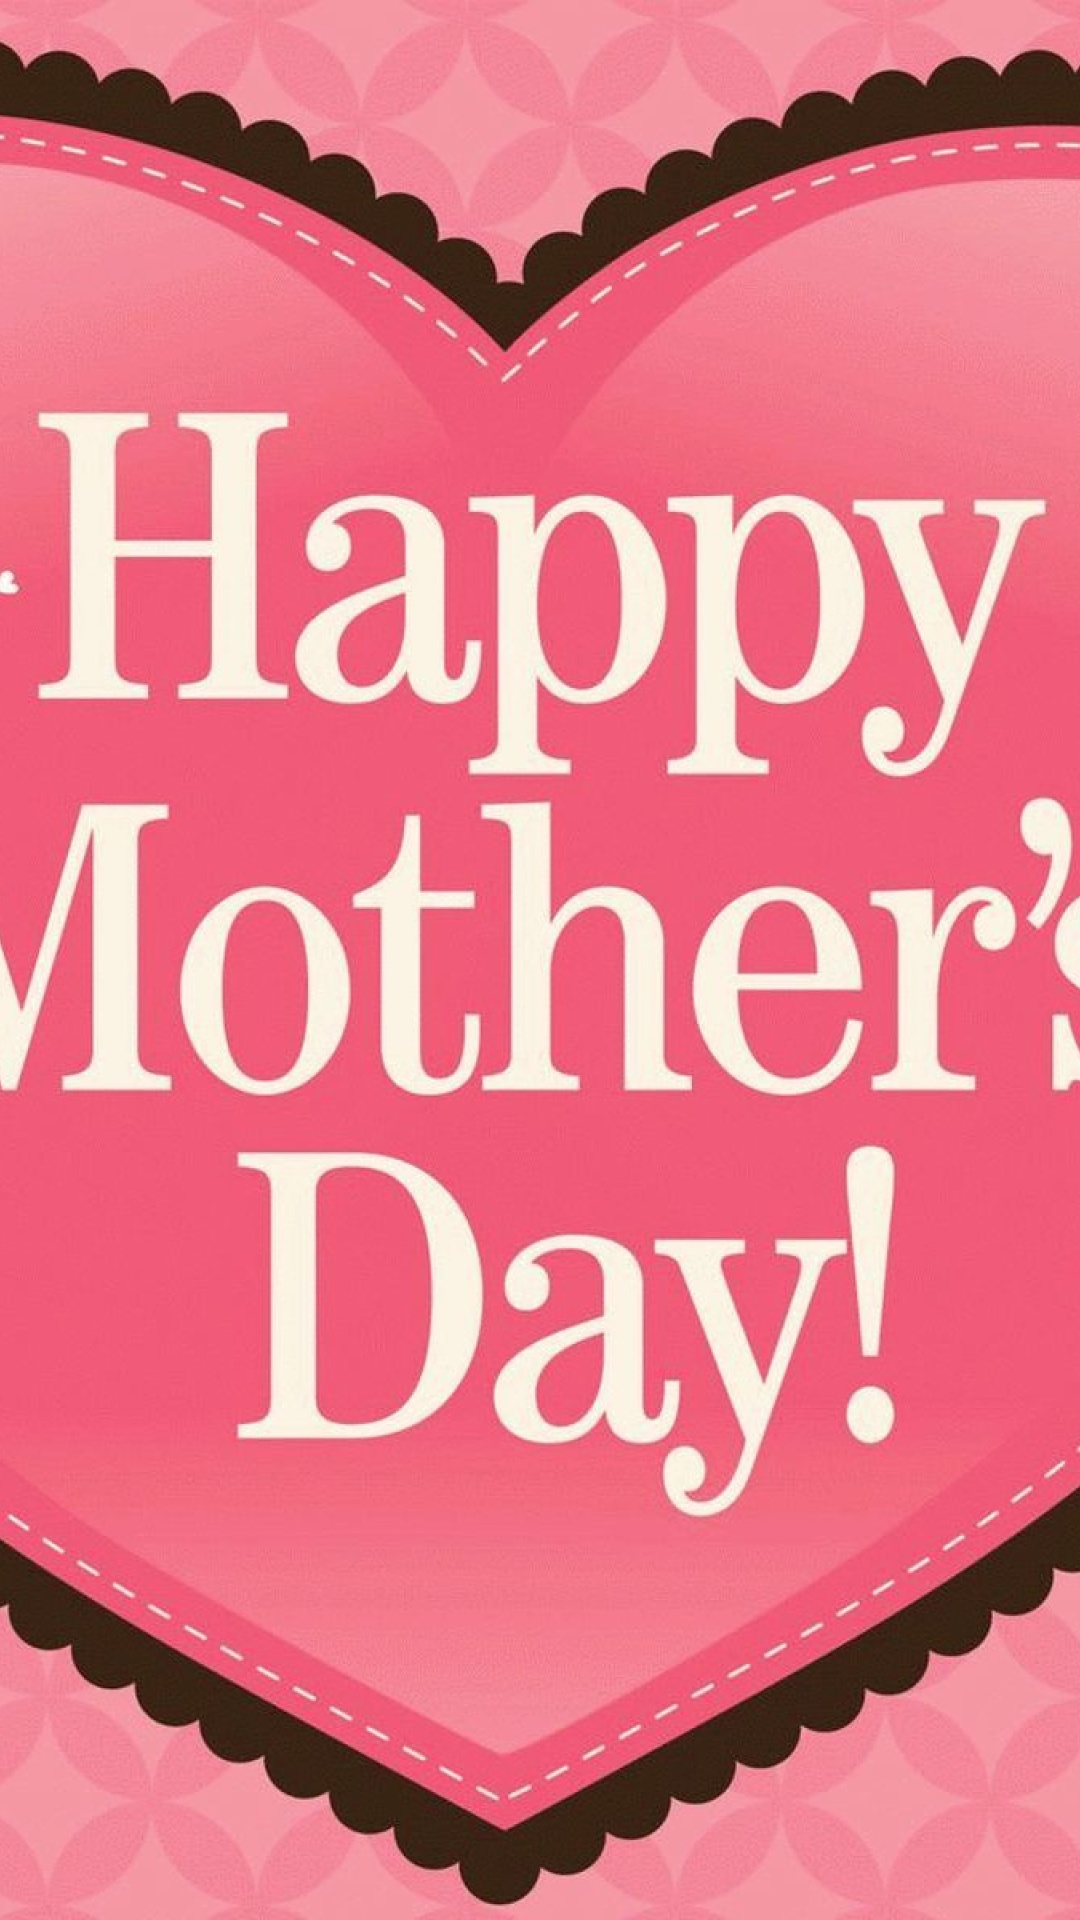 Happy Mother Day wallpaper 1080x1920